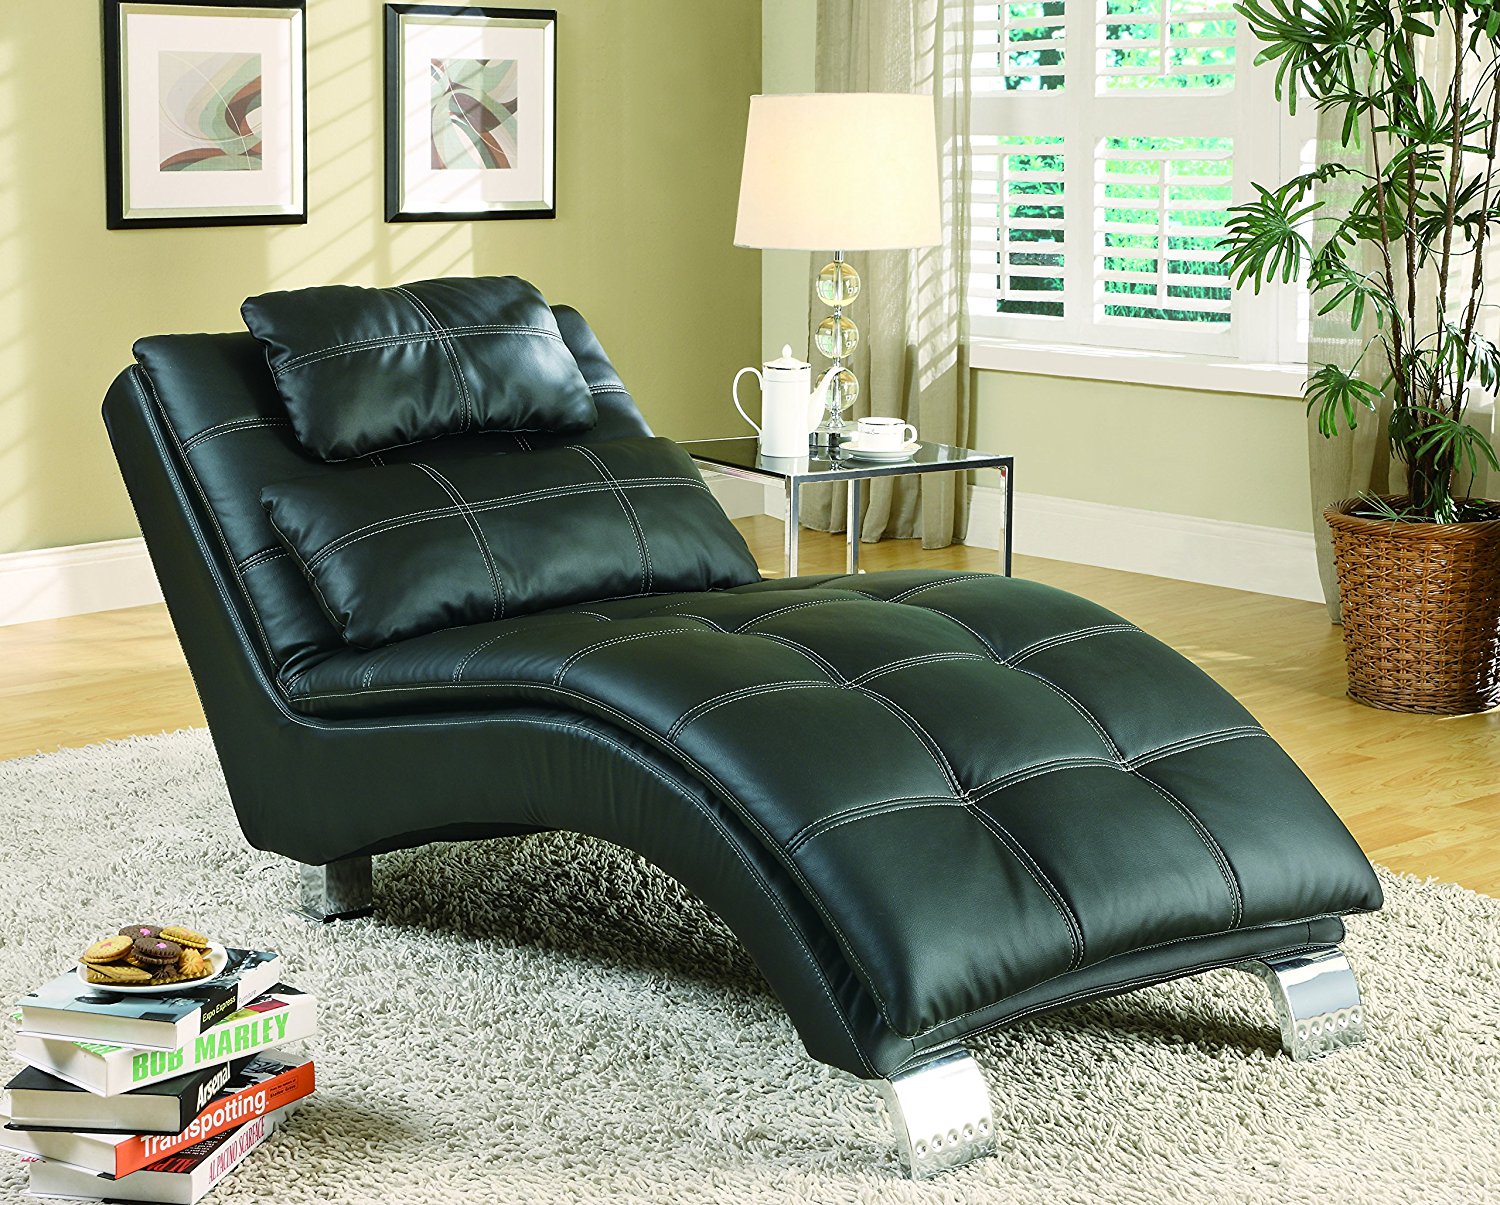 Coaster Home Furnishings 550075 Contemporary Chaise, Black